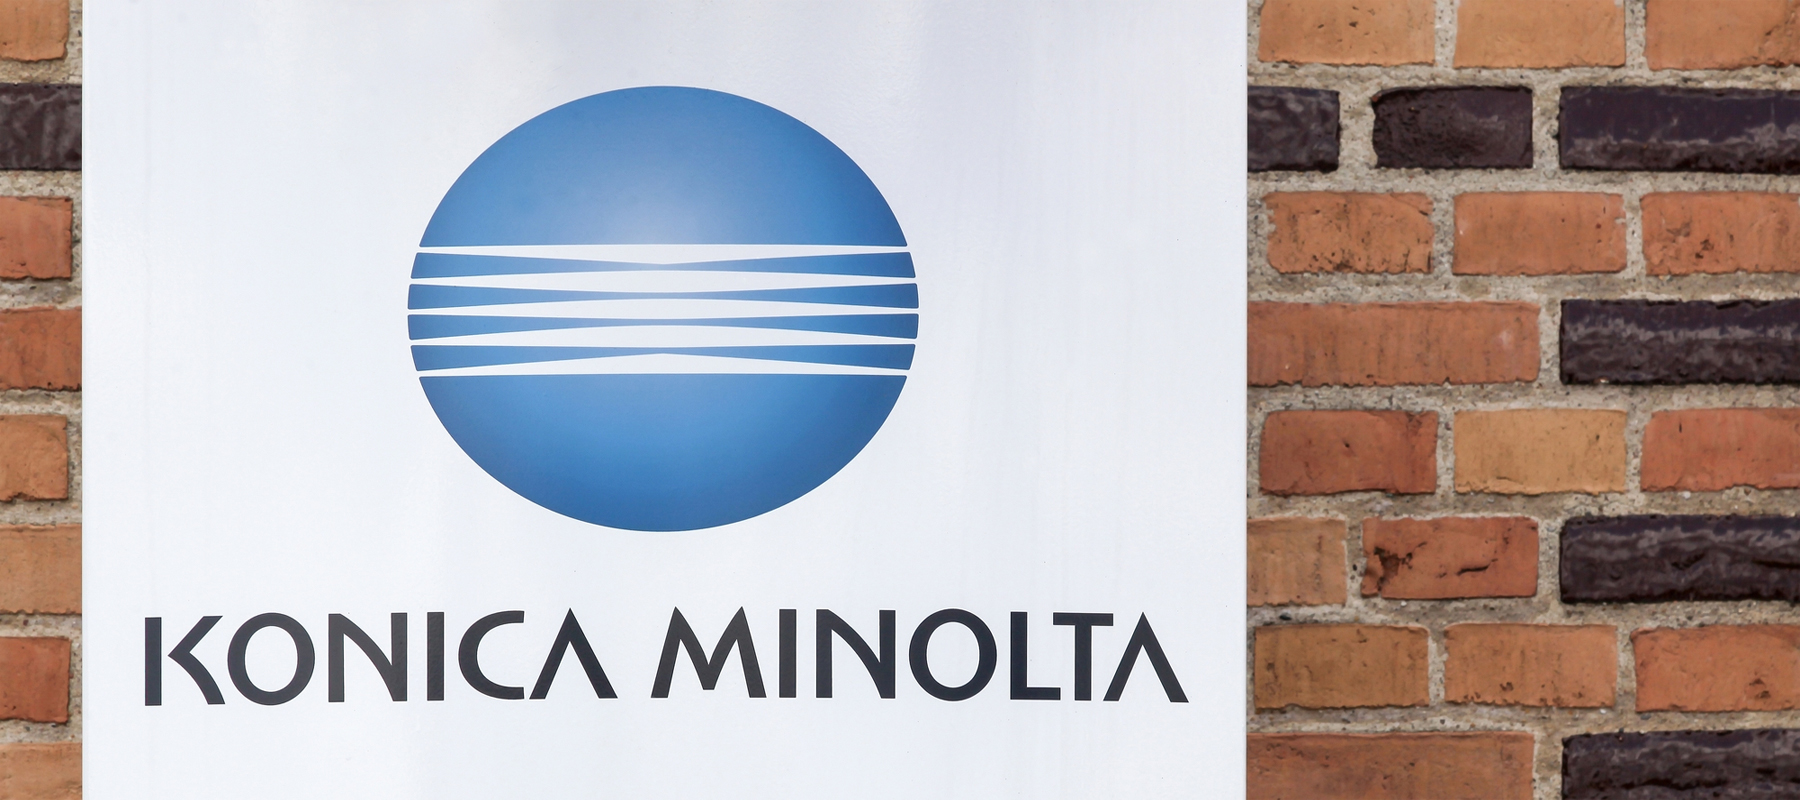 How Much Does a Konica Minolta Copier Cost?